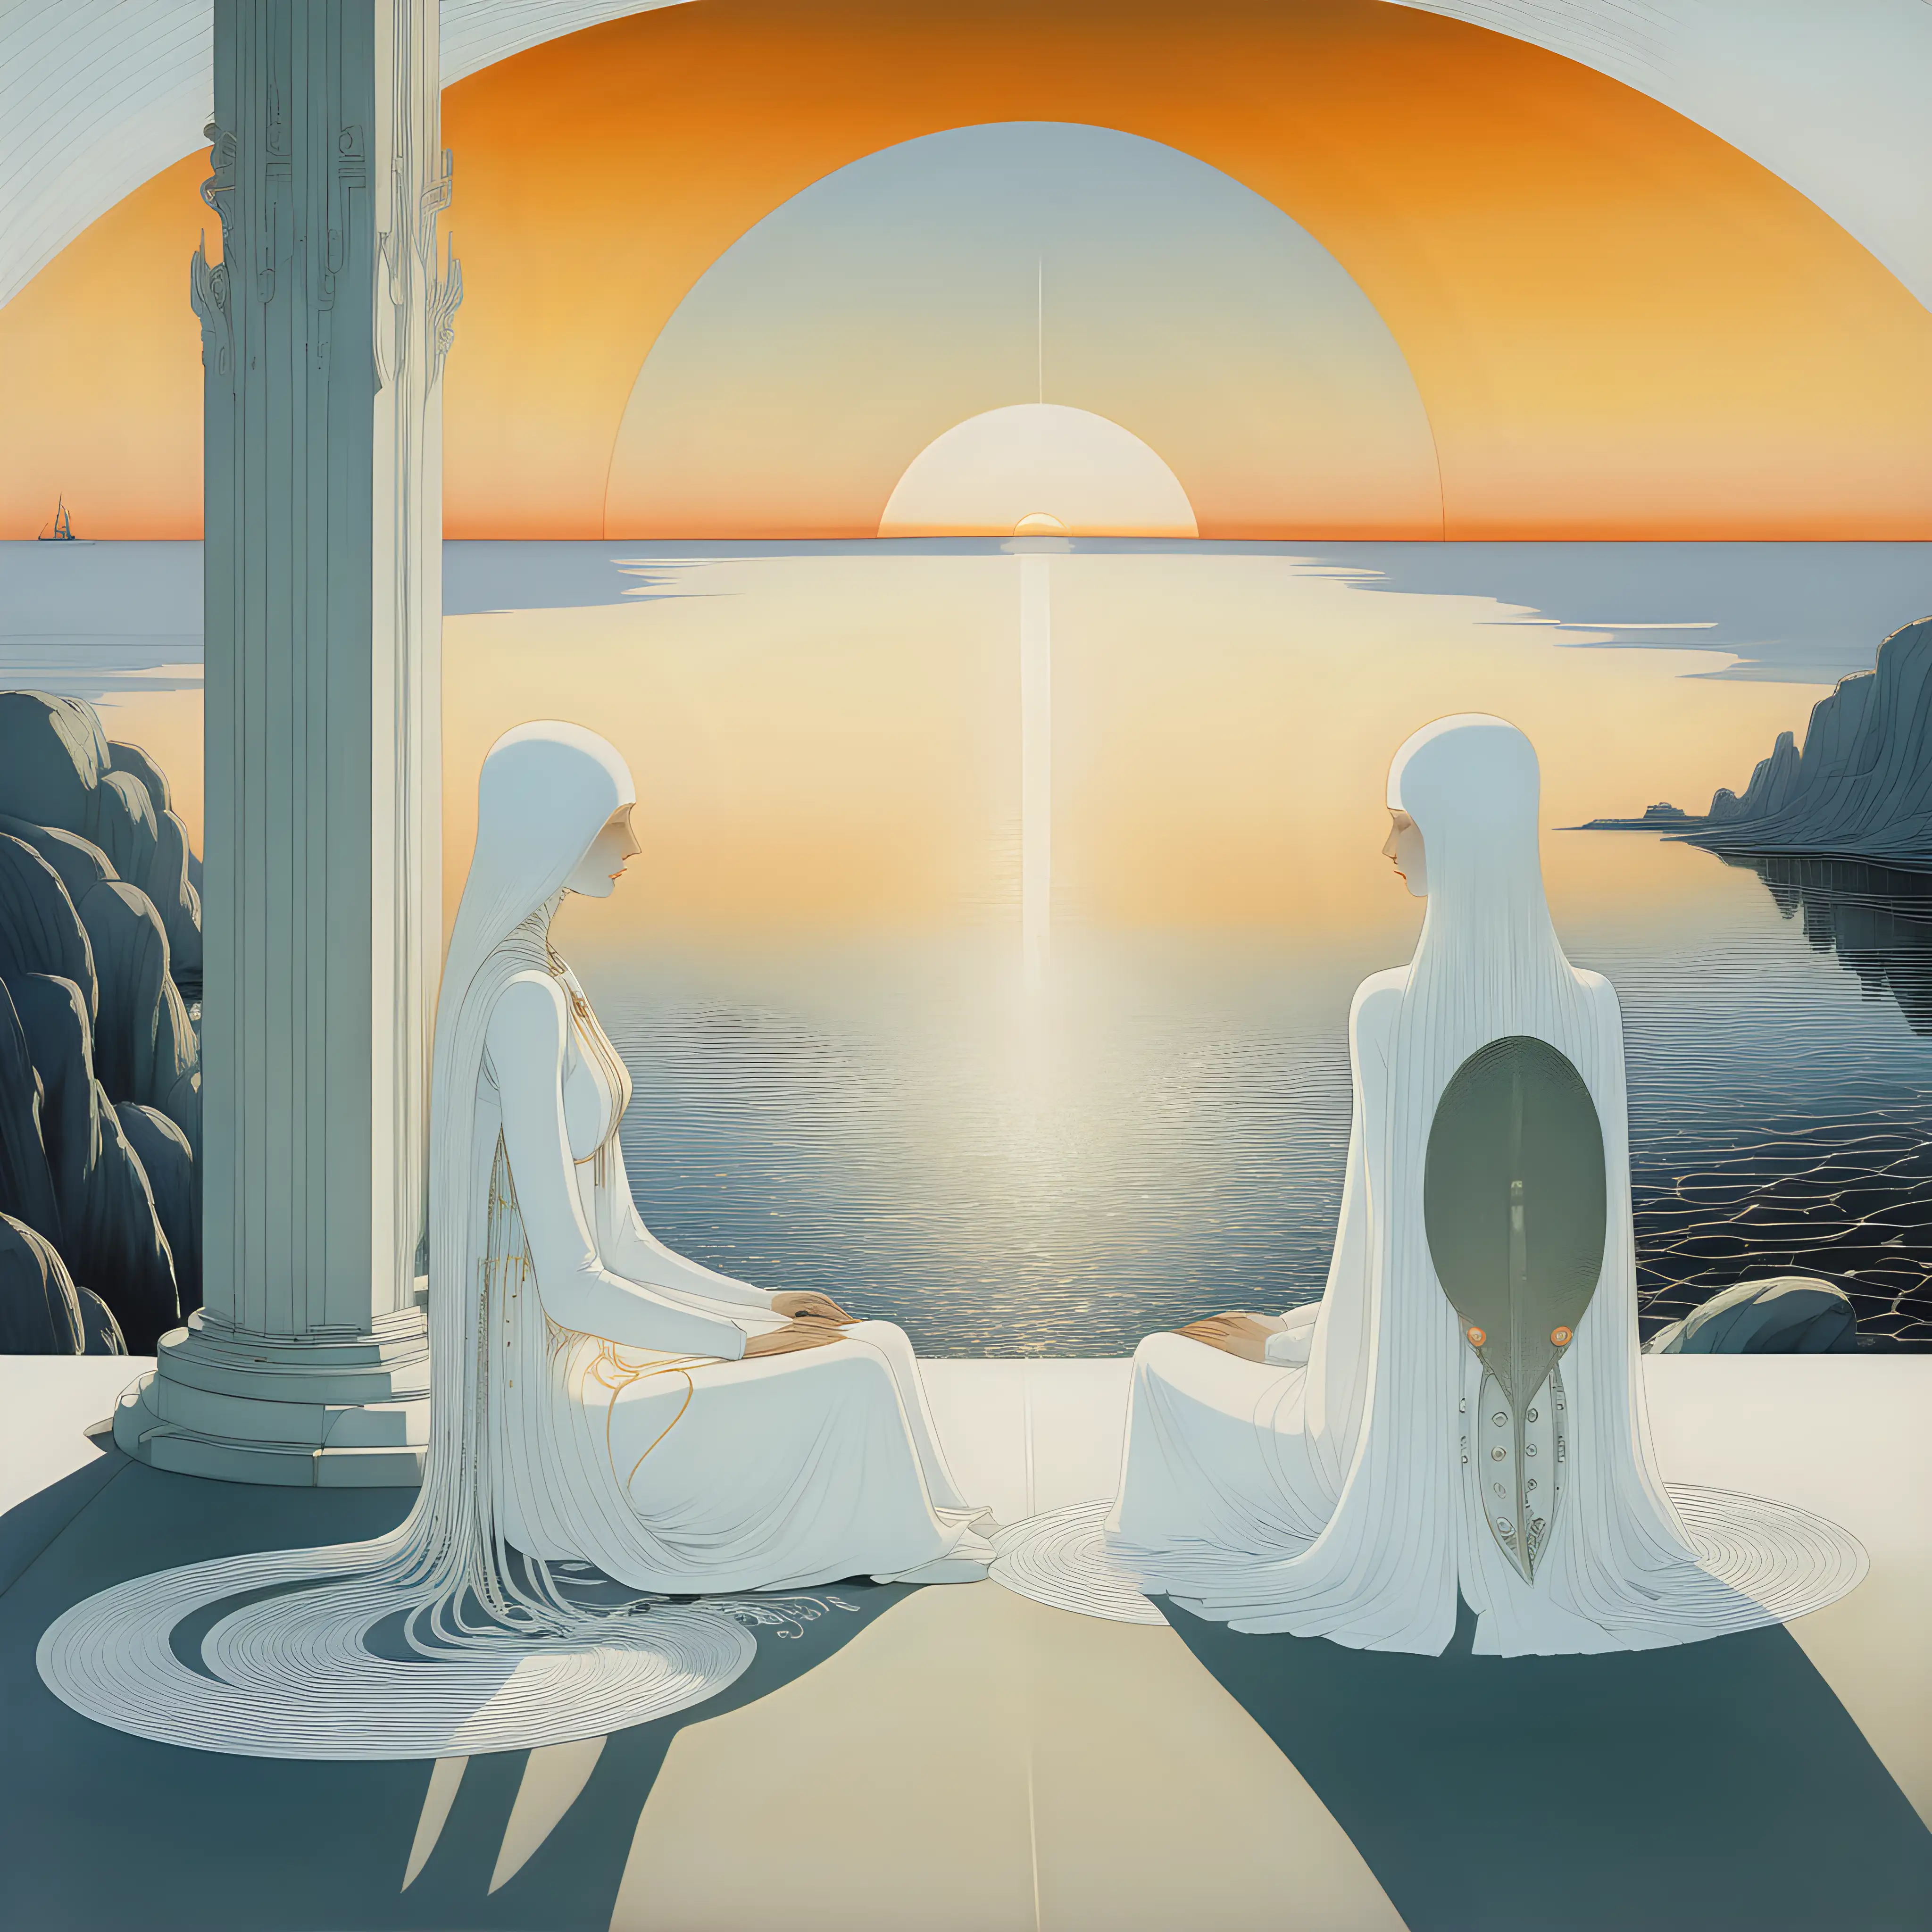 Futuristic Ocean Sunset Scene with Three Figures in White by Kay Nielsen